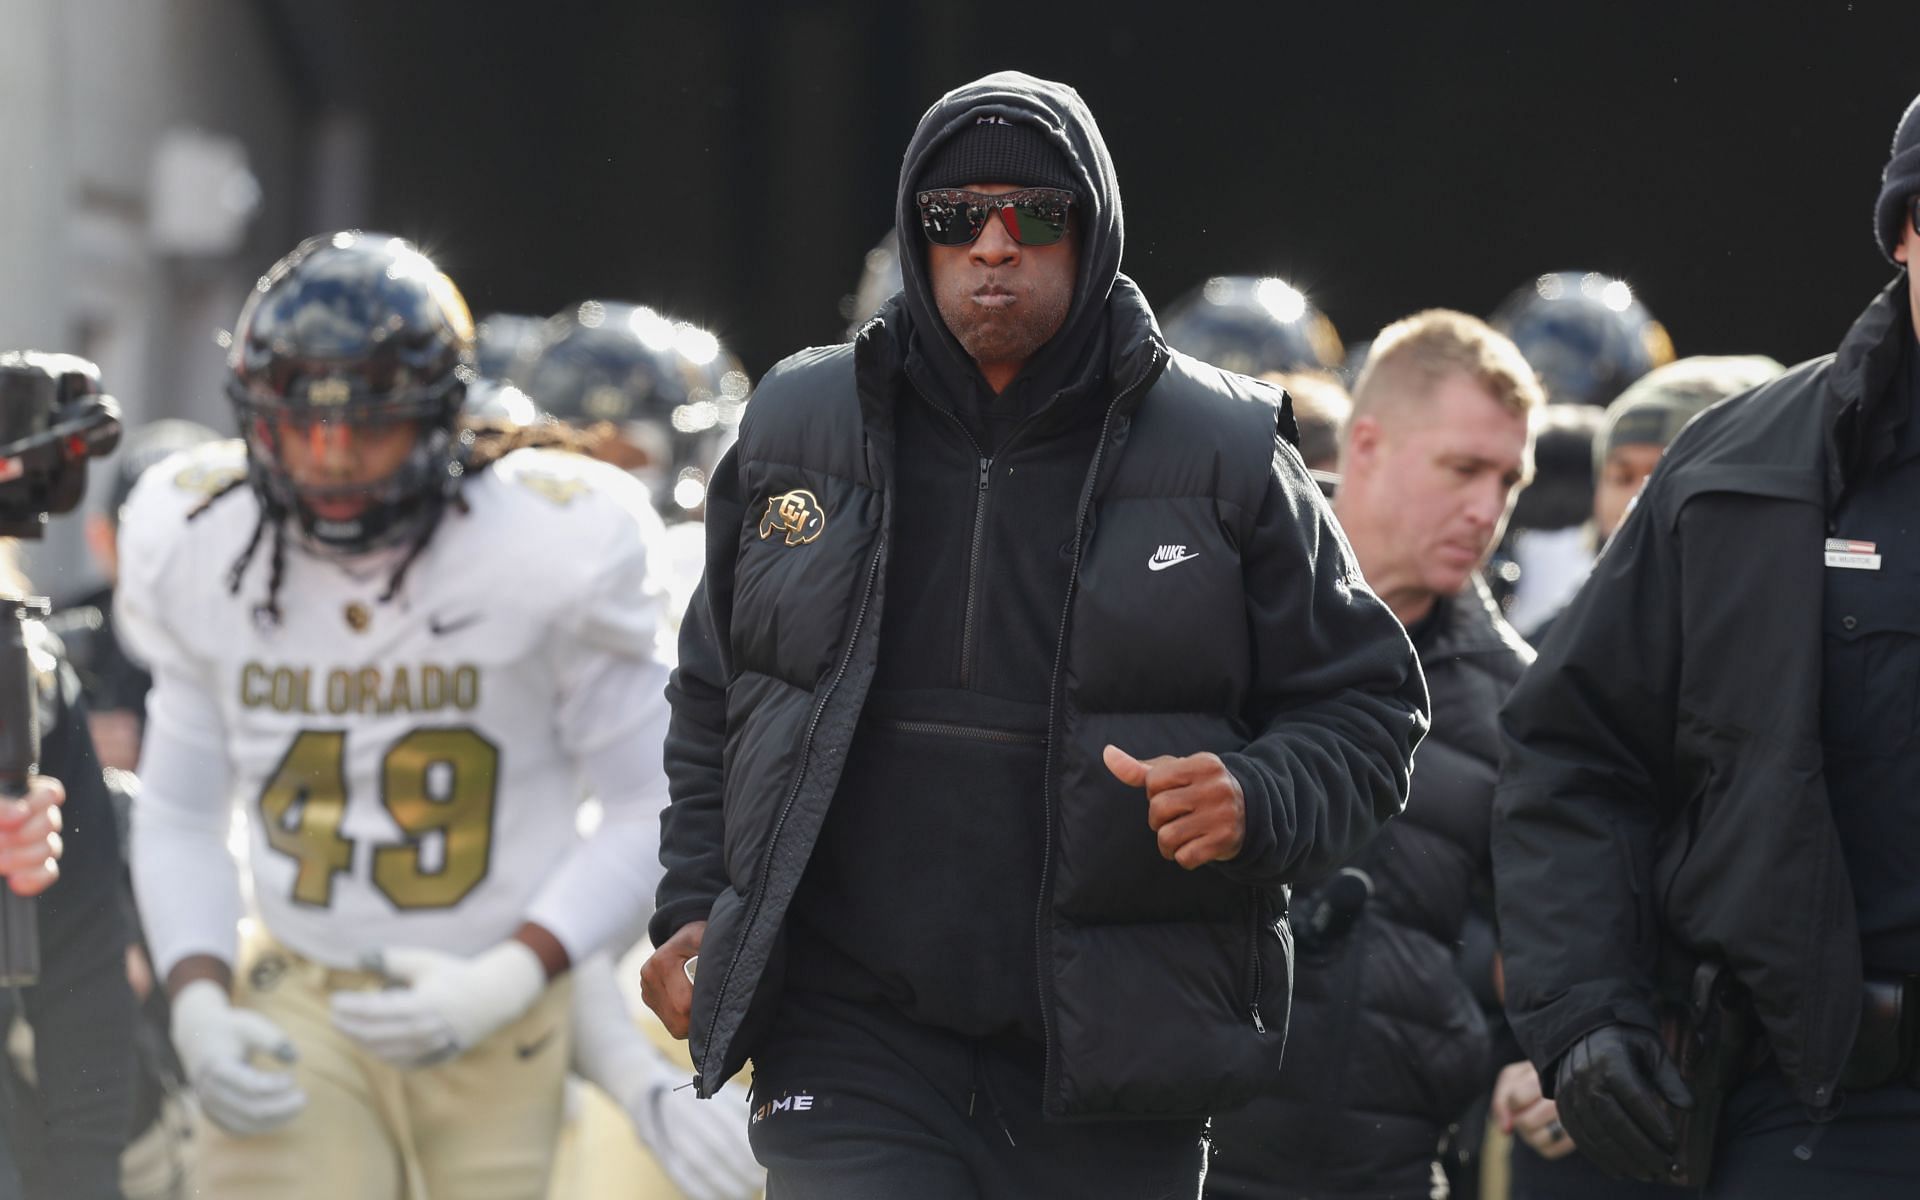 A merely good college football program? Coach Prime and Colorado might take issue with CFR.